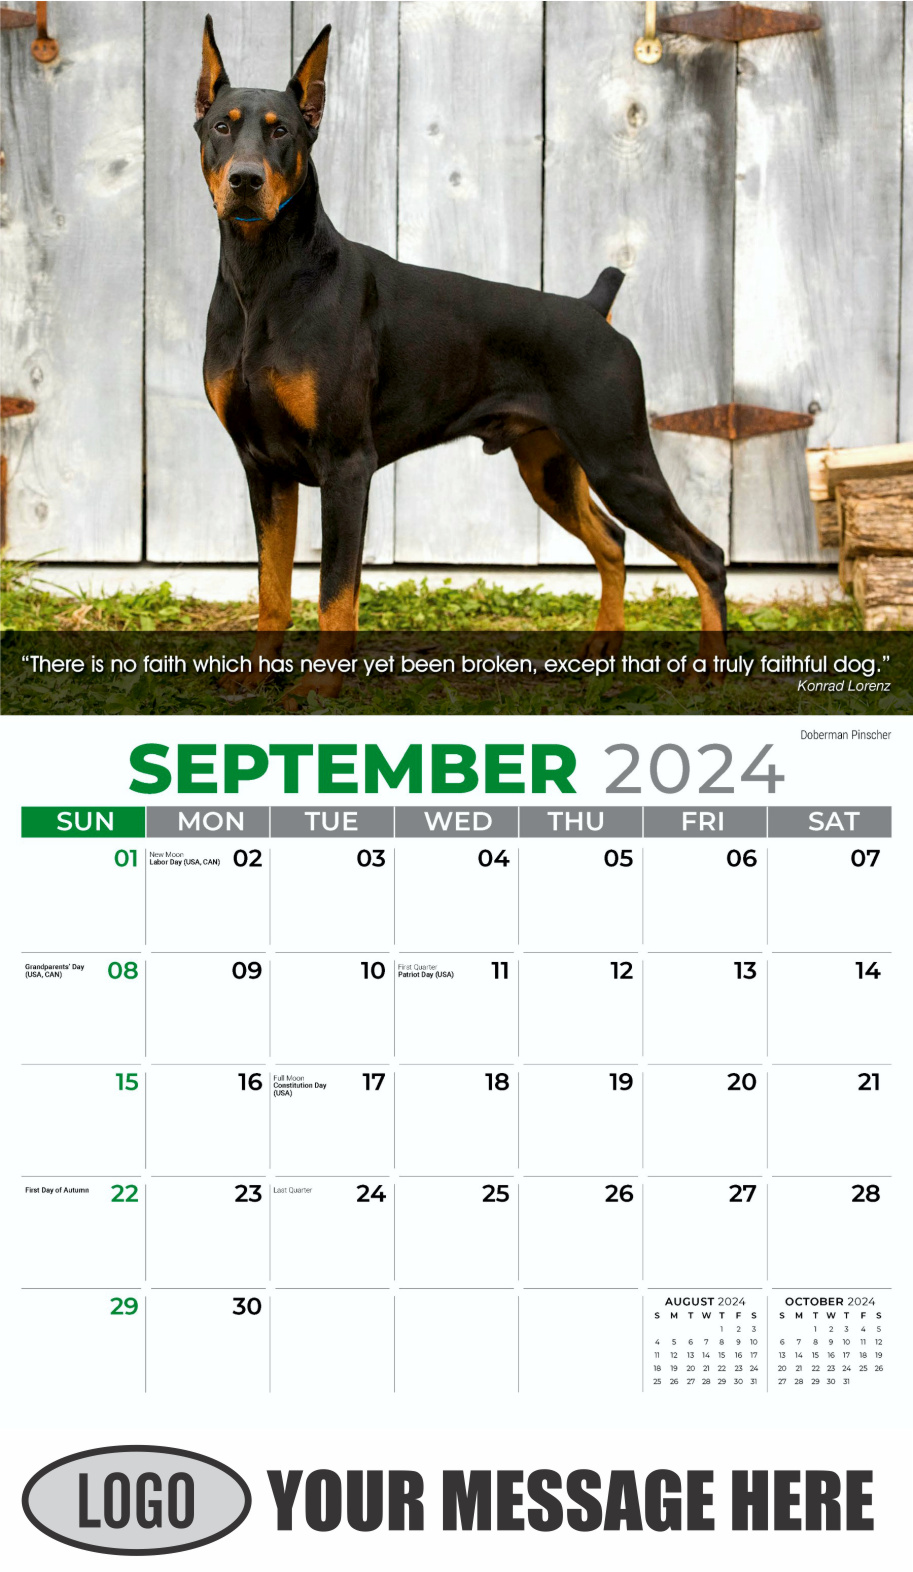 Dogs 2024 Vets and Pets Business Promotion Calendar - September